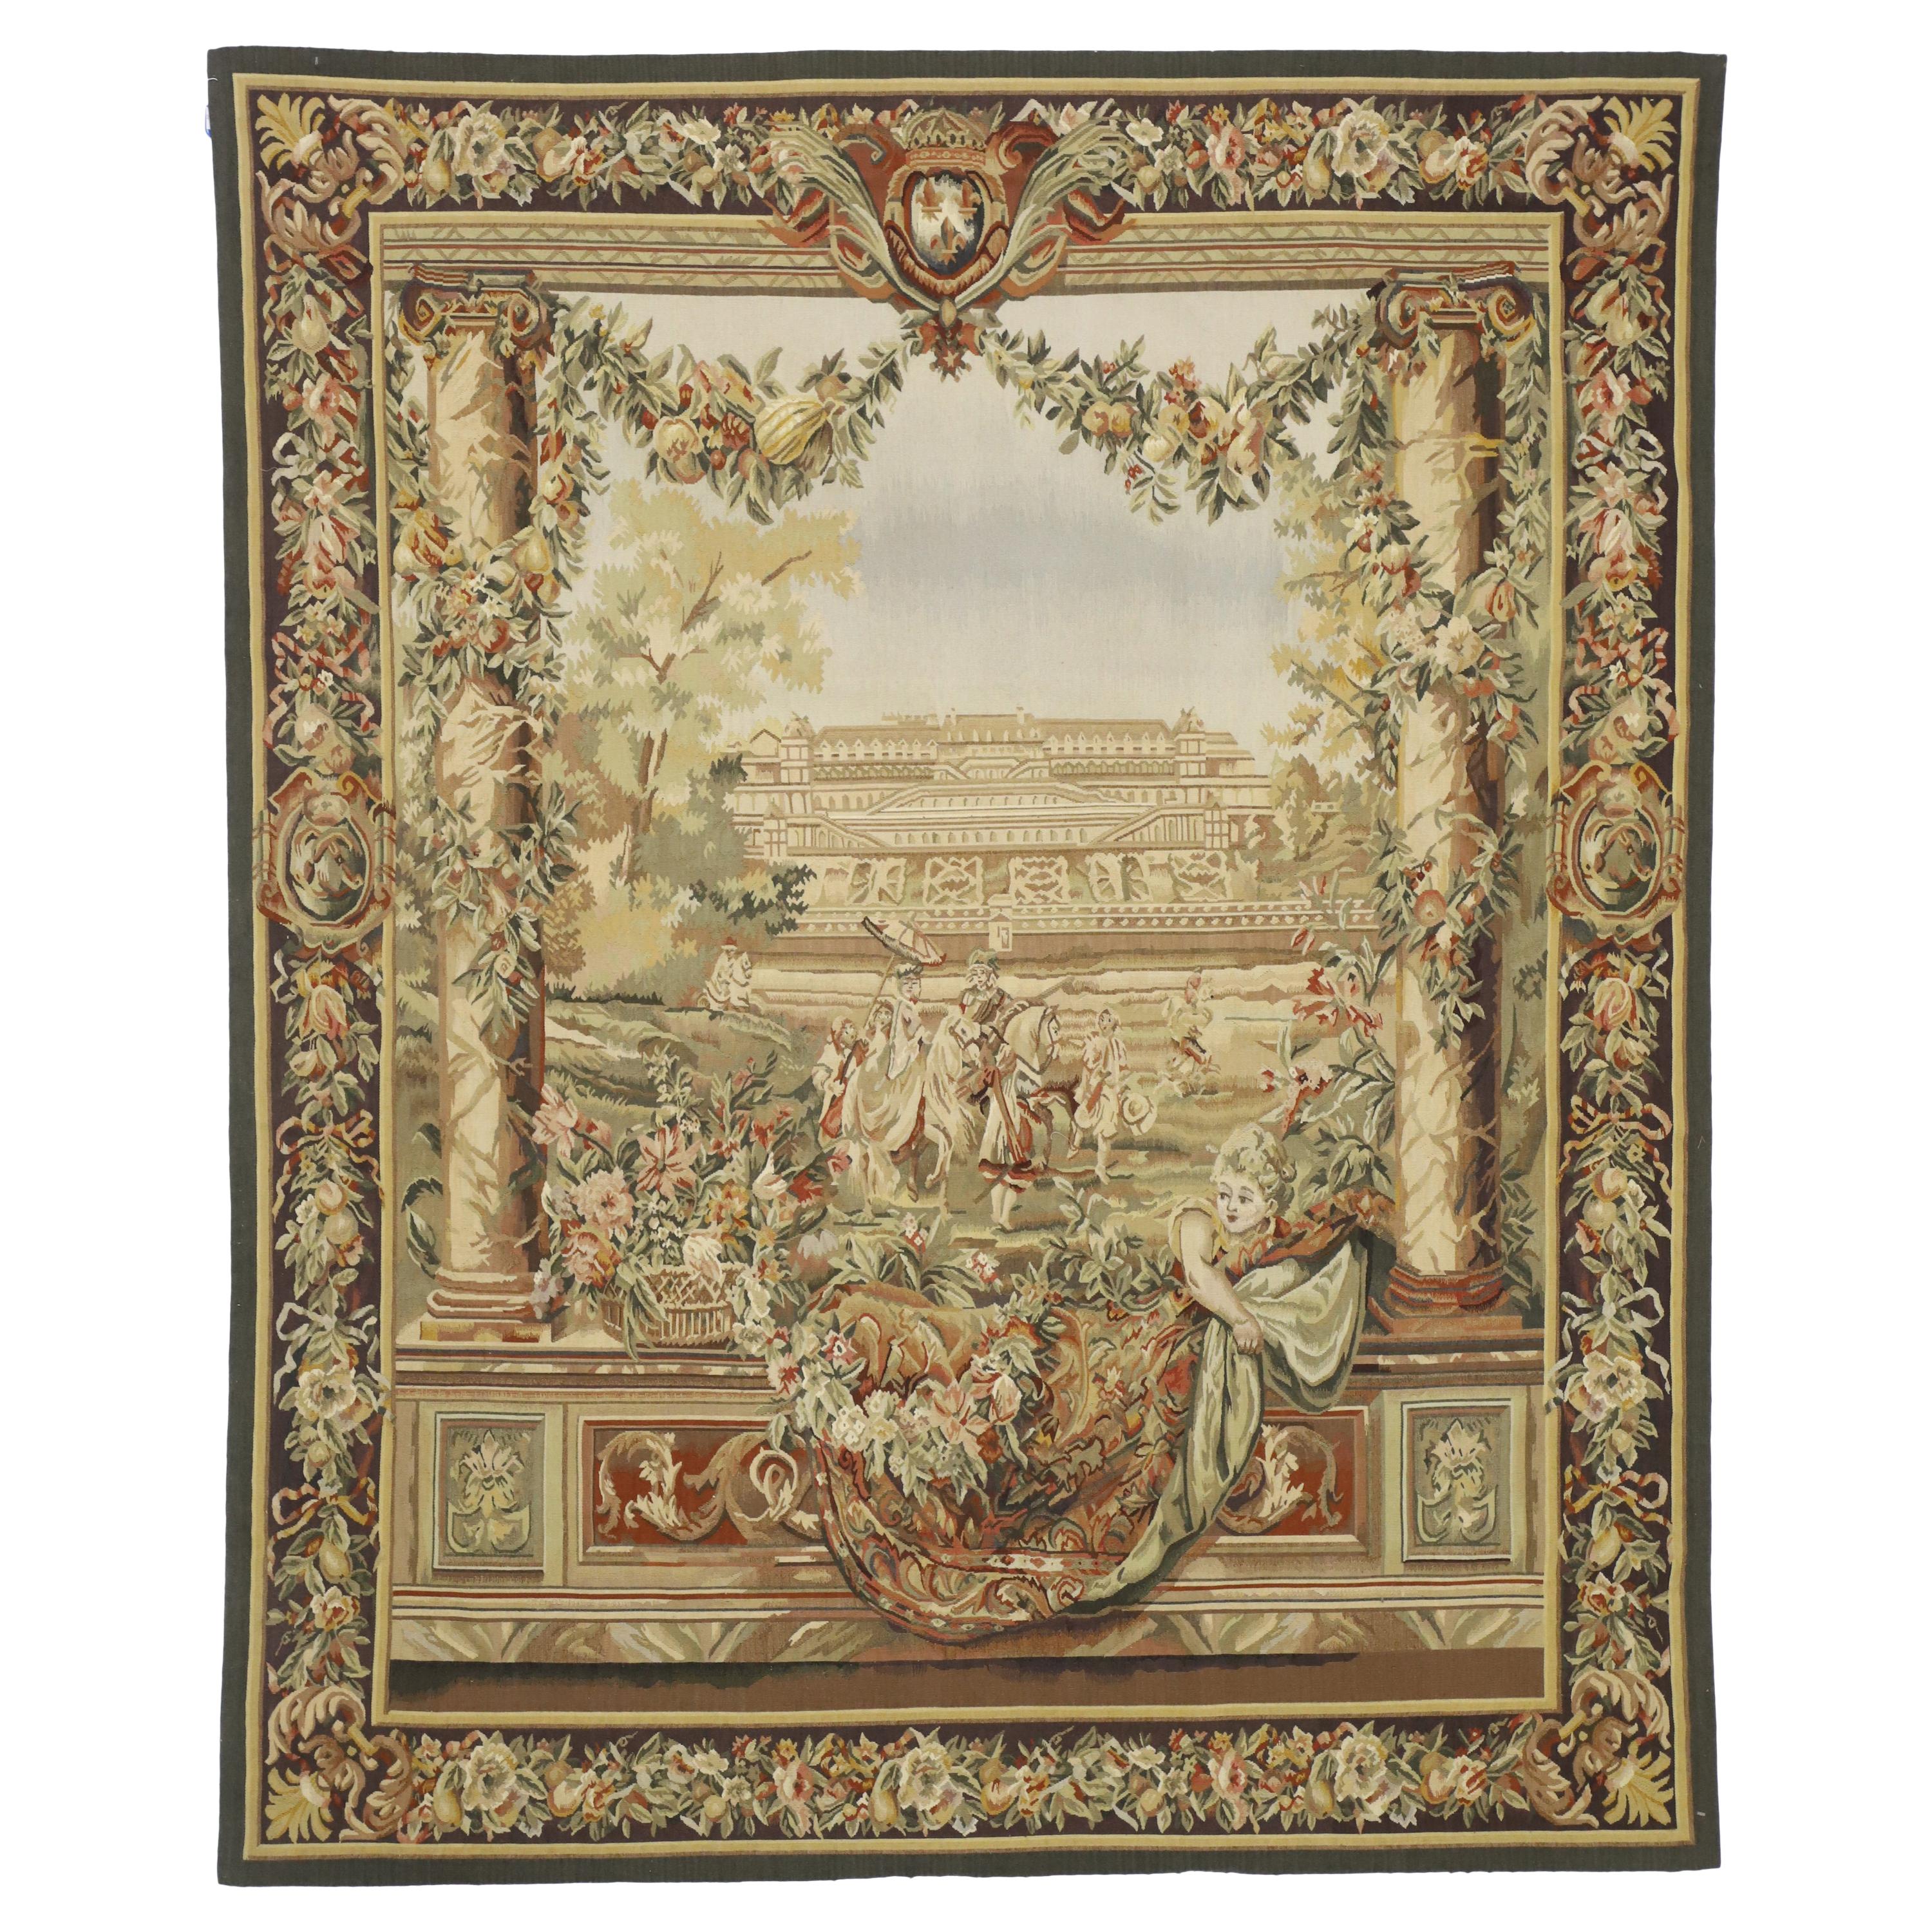 Gobelins Inspired Chateau Neuf Saint-Germain Tapestry with Louis XIV Style